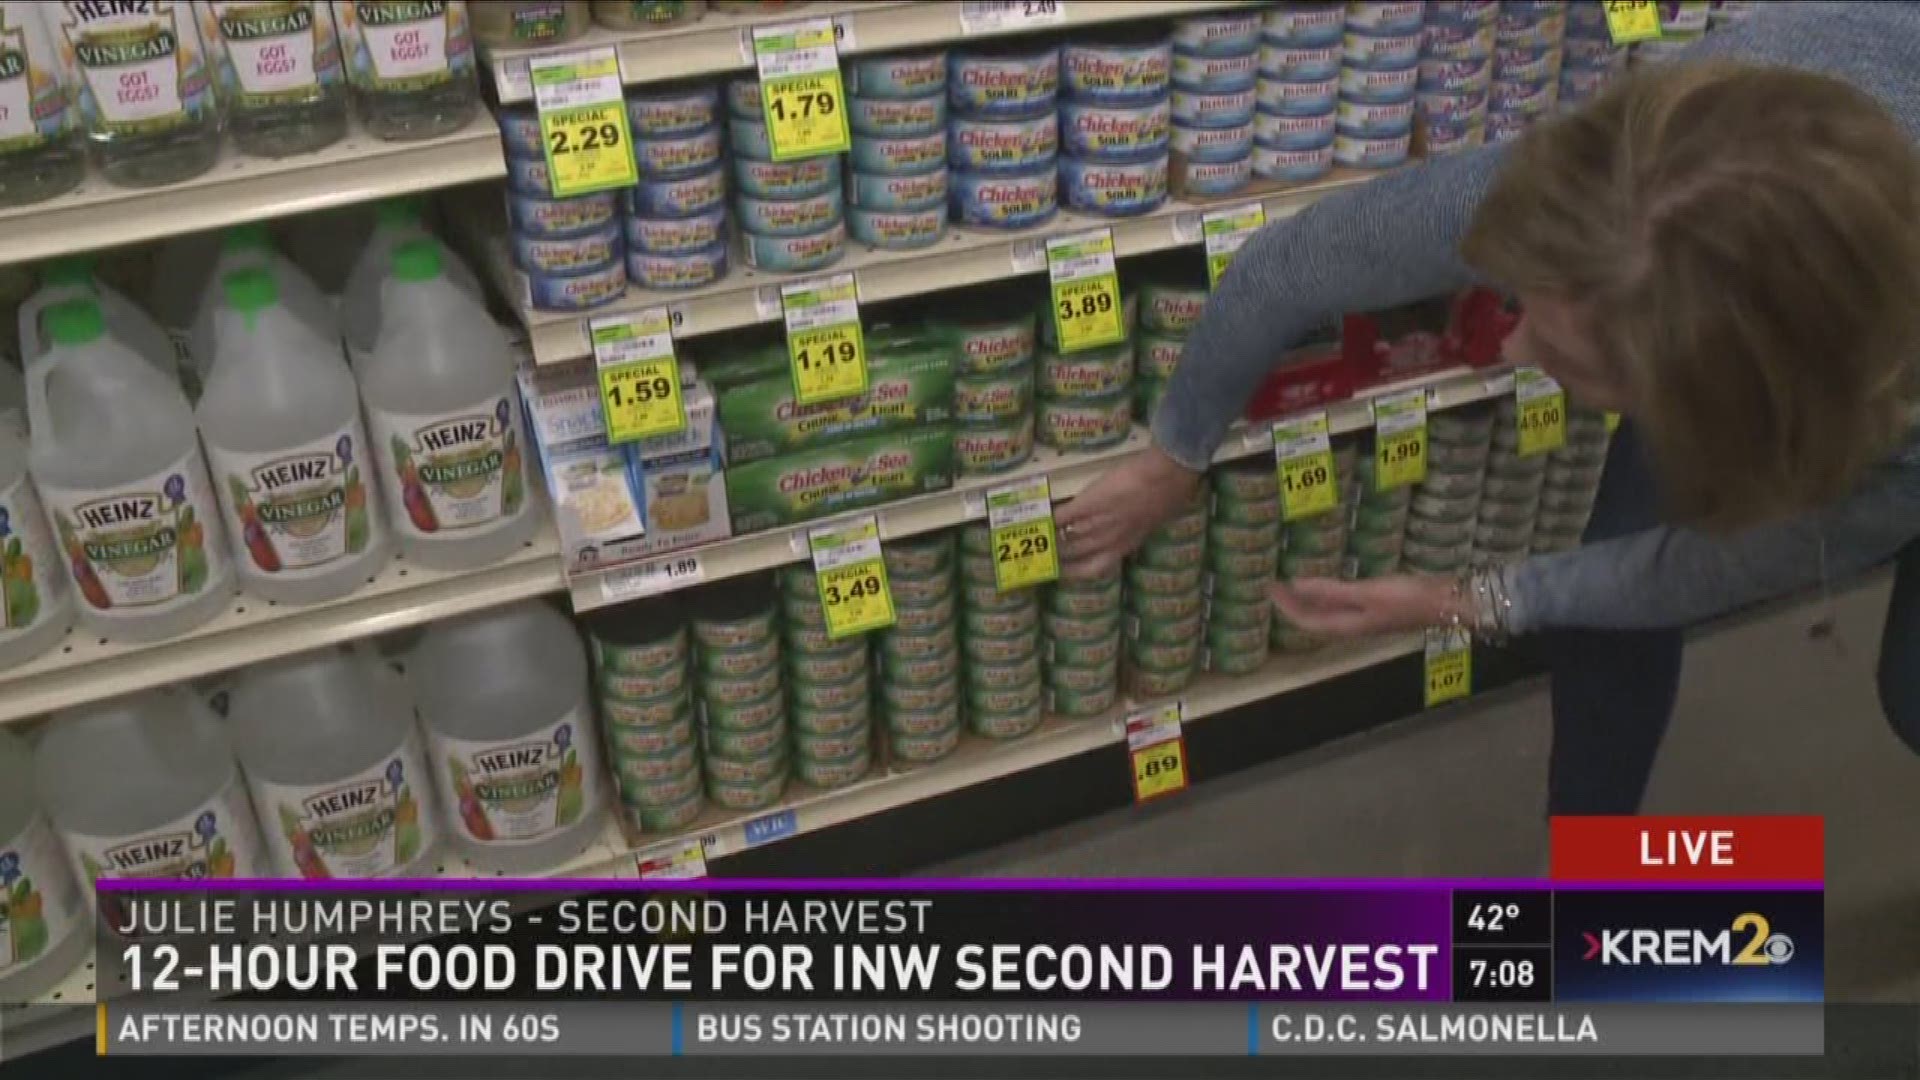 It will benefit the Inland Northwest Second Harvest Food Bank.